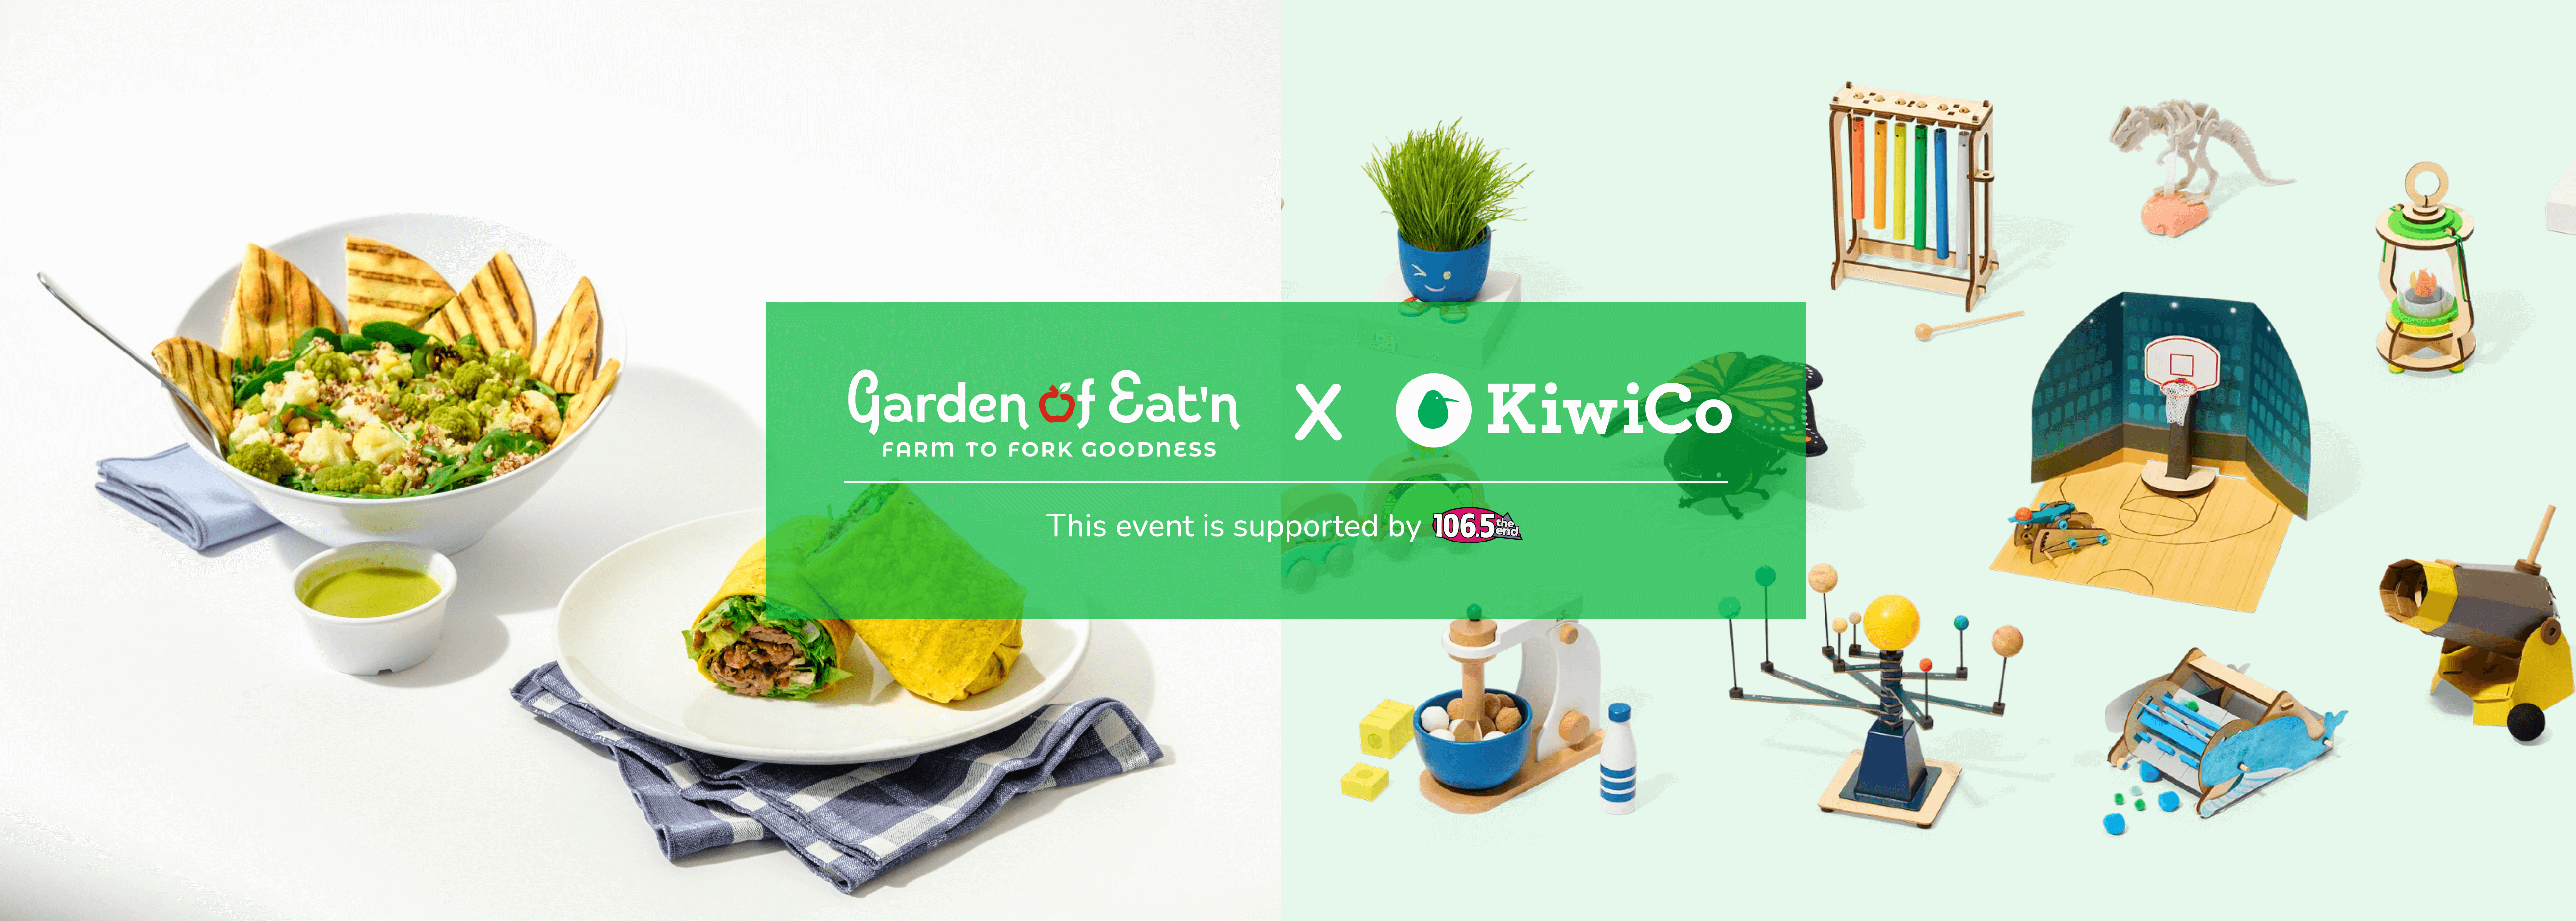 A banner image of food and toys with the logos of Garden Of Eat'n and KiwiCo